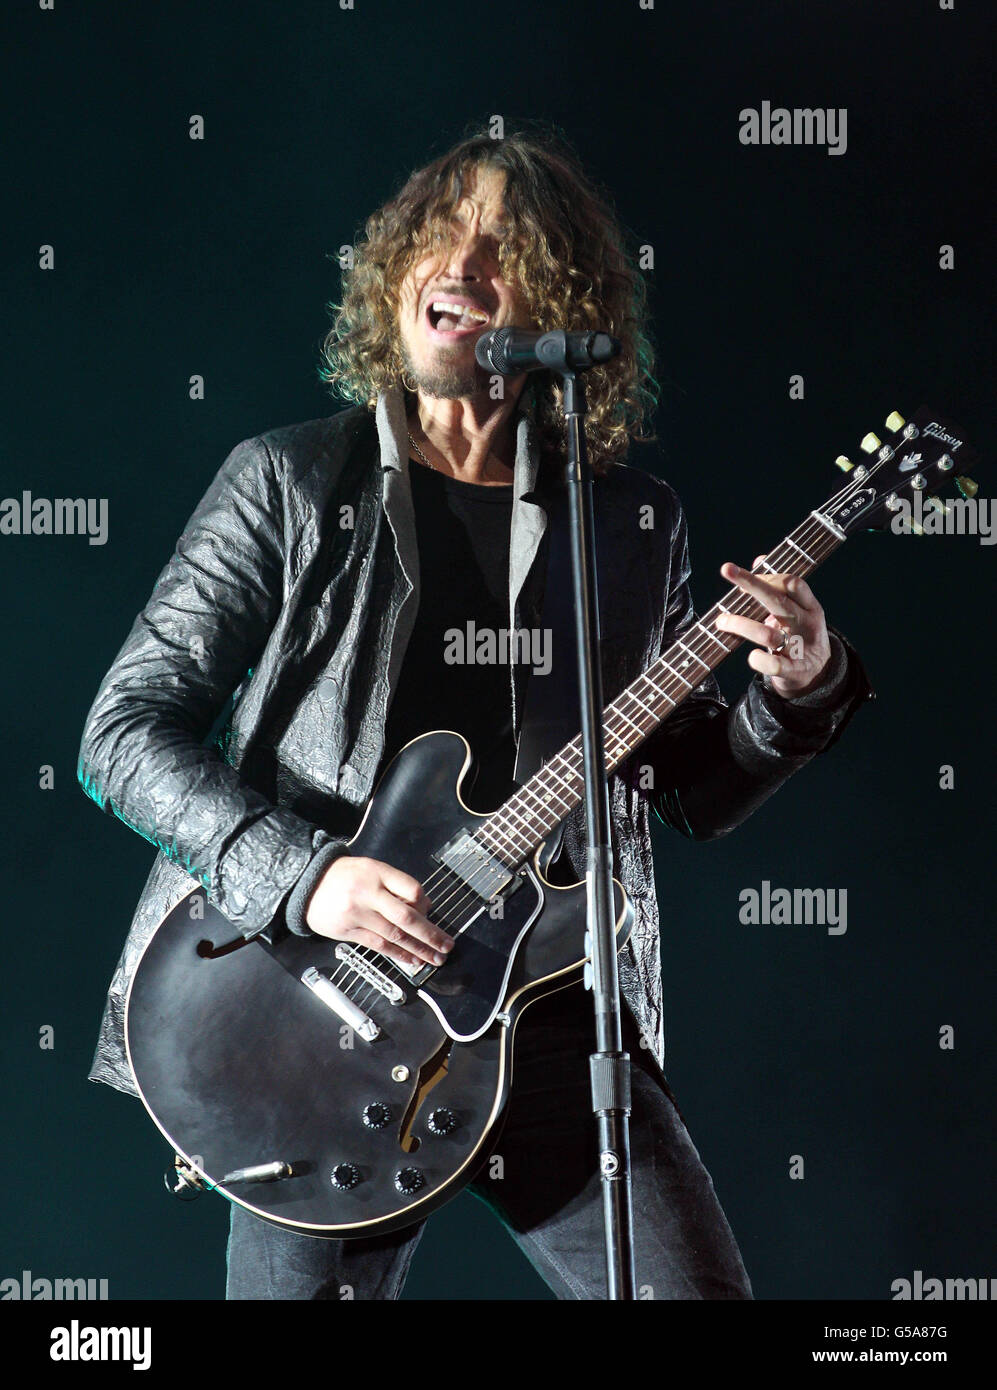 Chris Cornell of Soundgarden performs at the Hard Rock Calling music festival in Hyde Park, London. Stock Photo